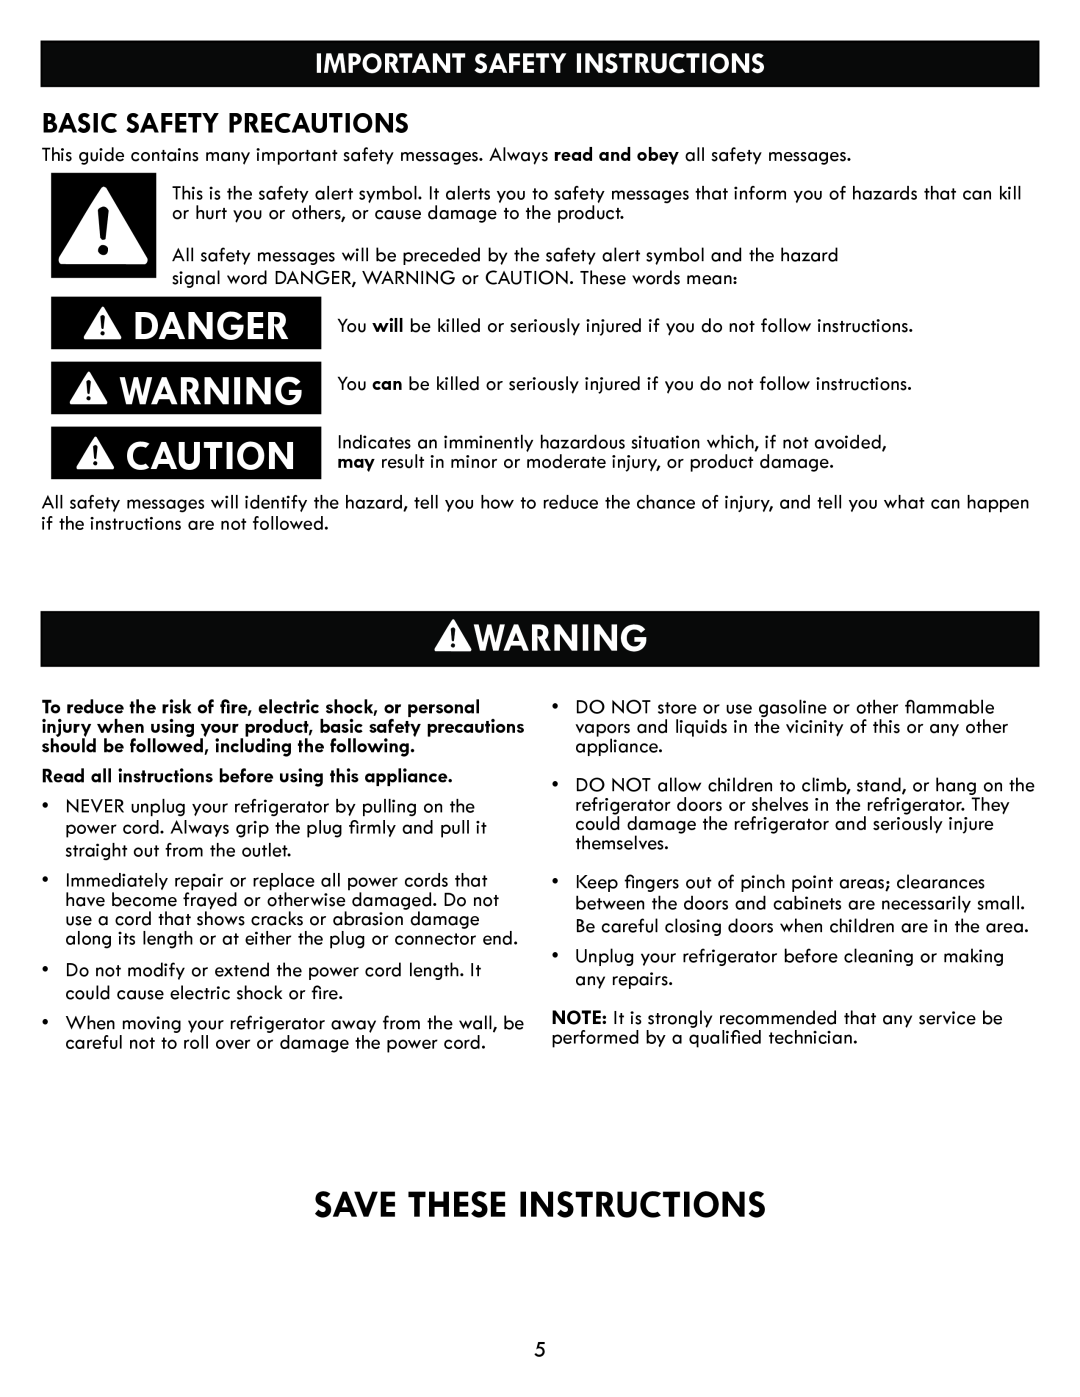 Kenmore kenmore manual Save These Instructions, Important Safety Instructions, Basic Safety Precautions, Danger 